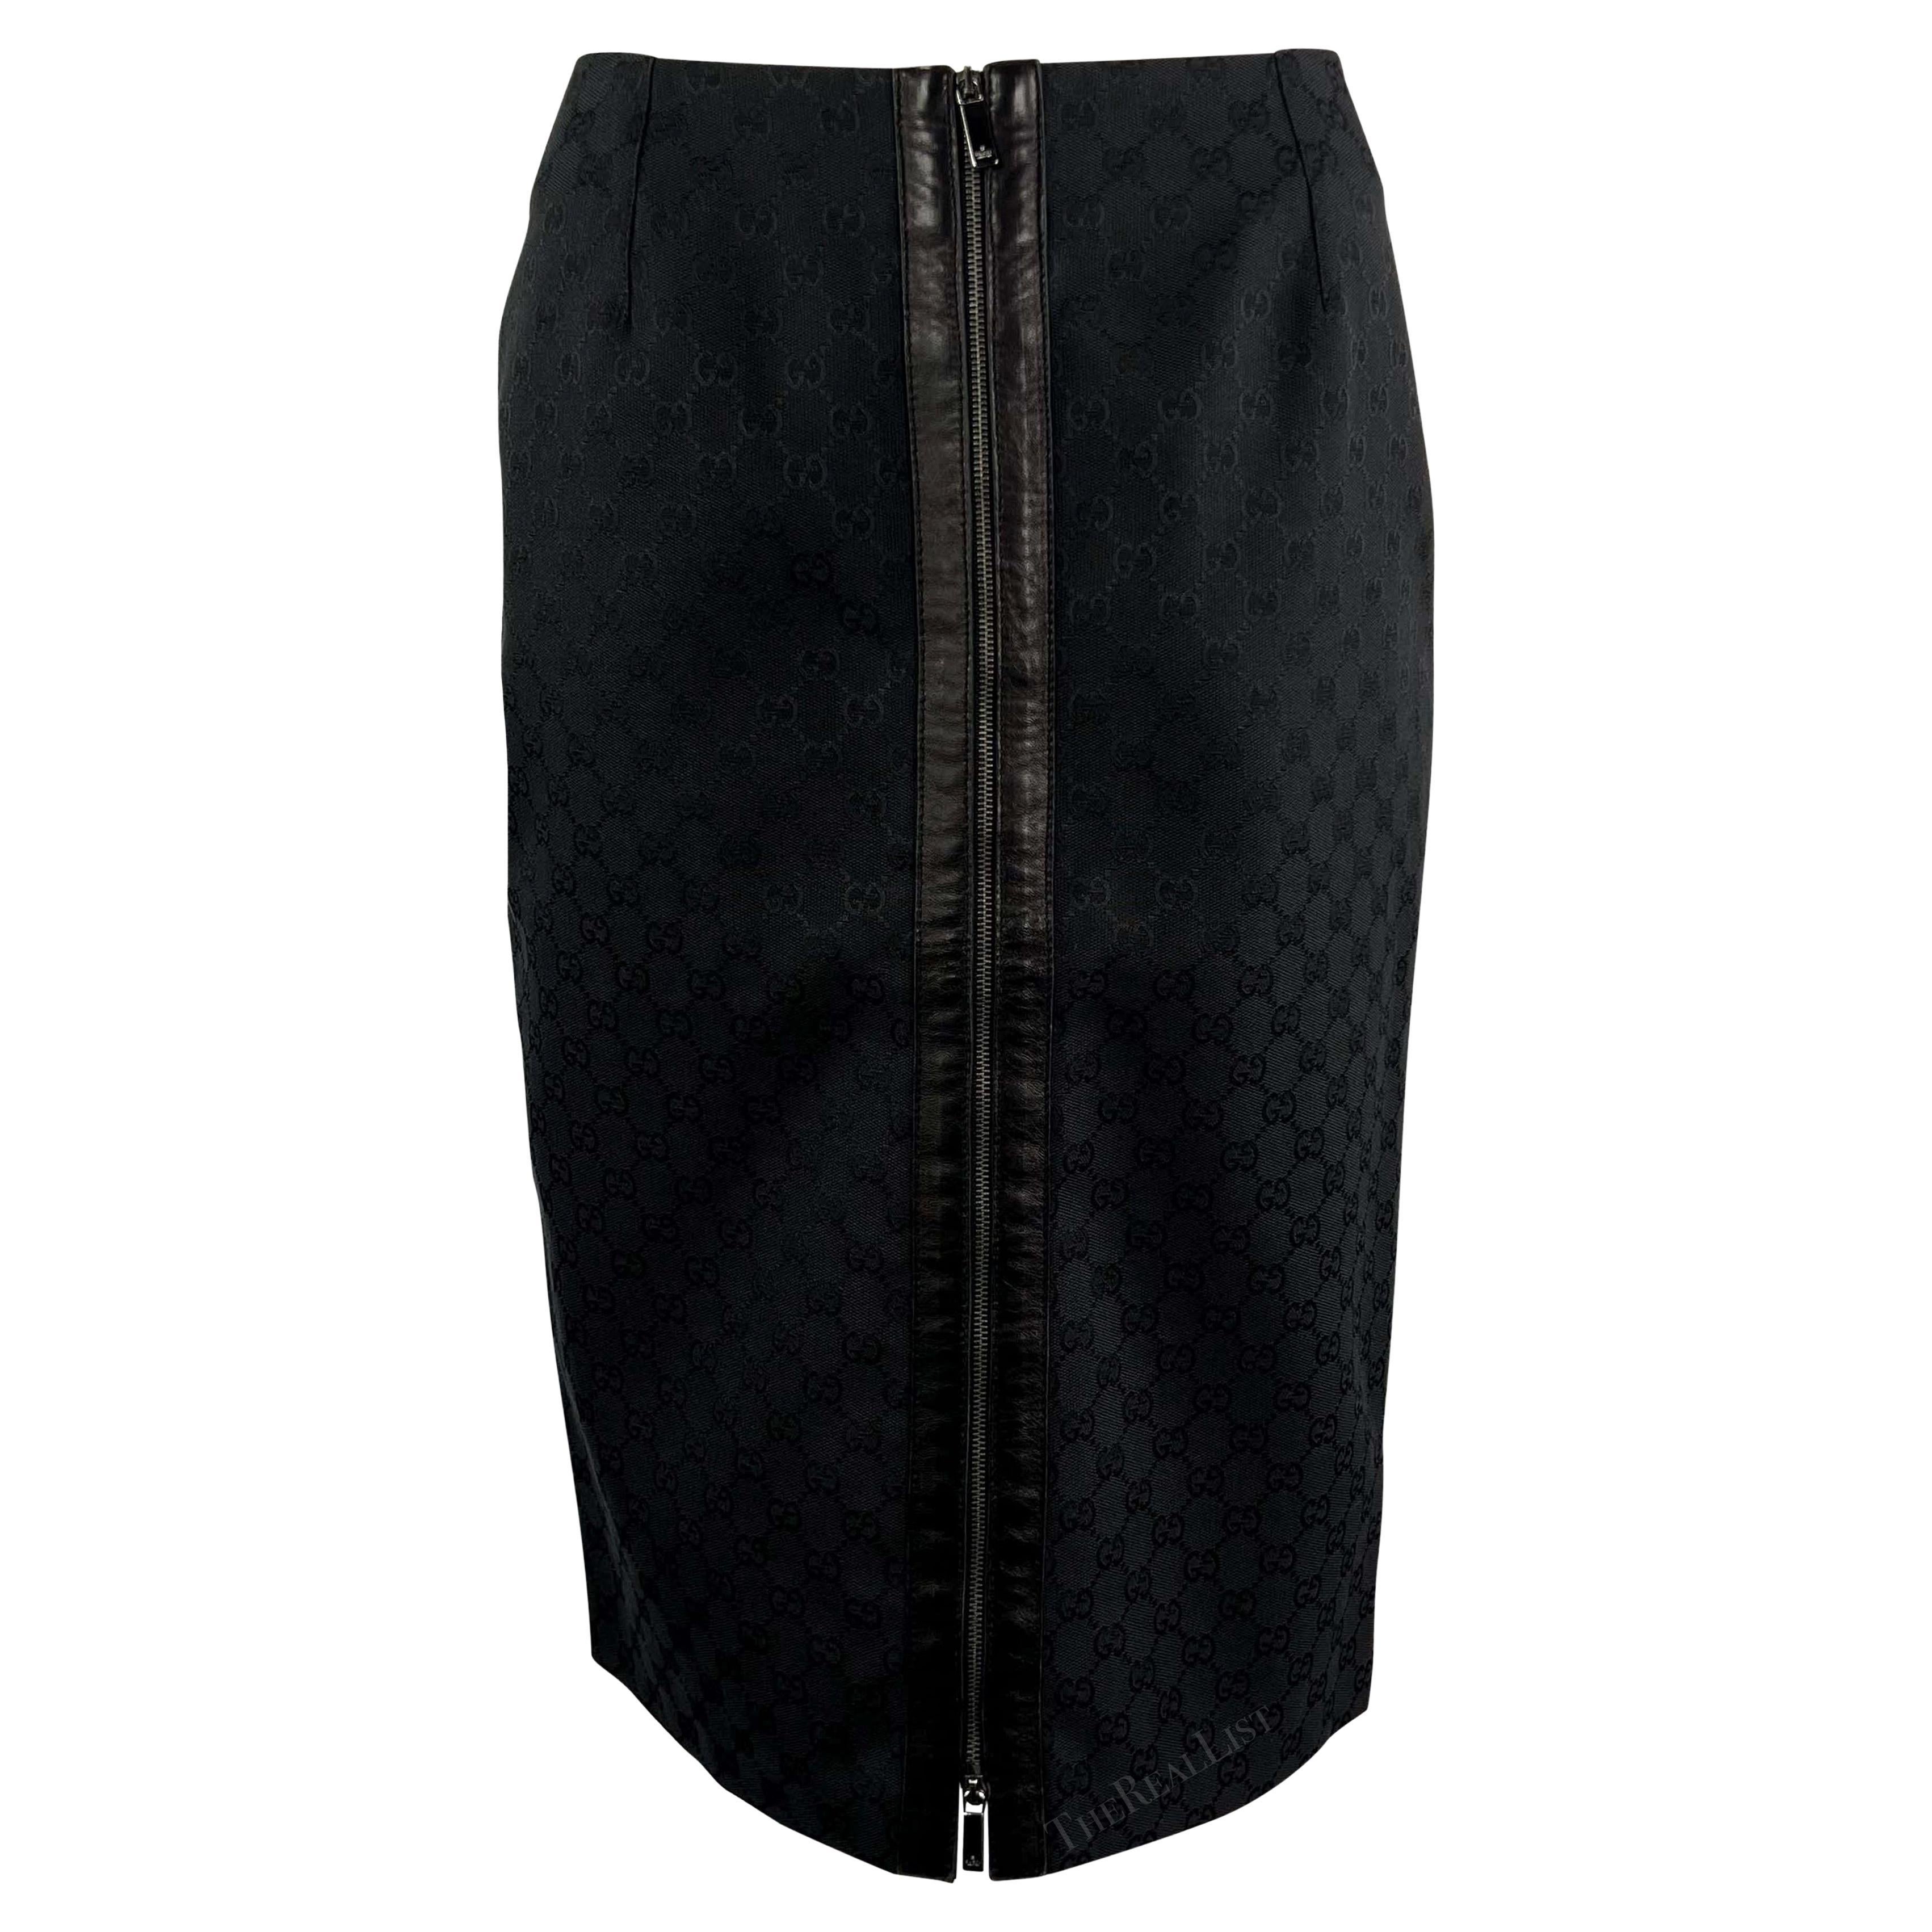 F/W 2000 Gucci by Tom Ford Black GG Monogram Zipper Pencil Skirt For Sale